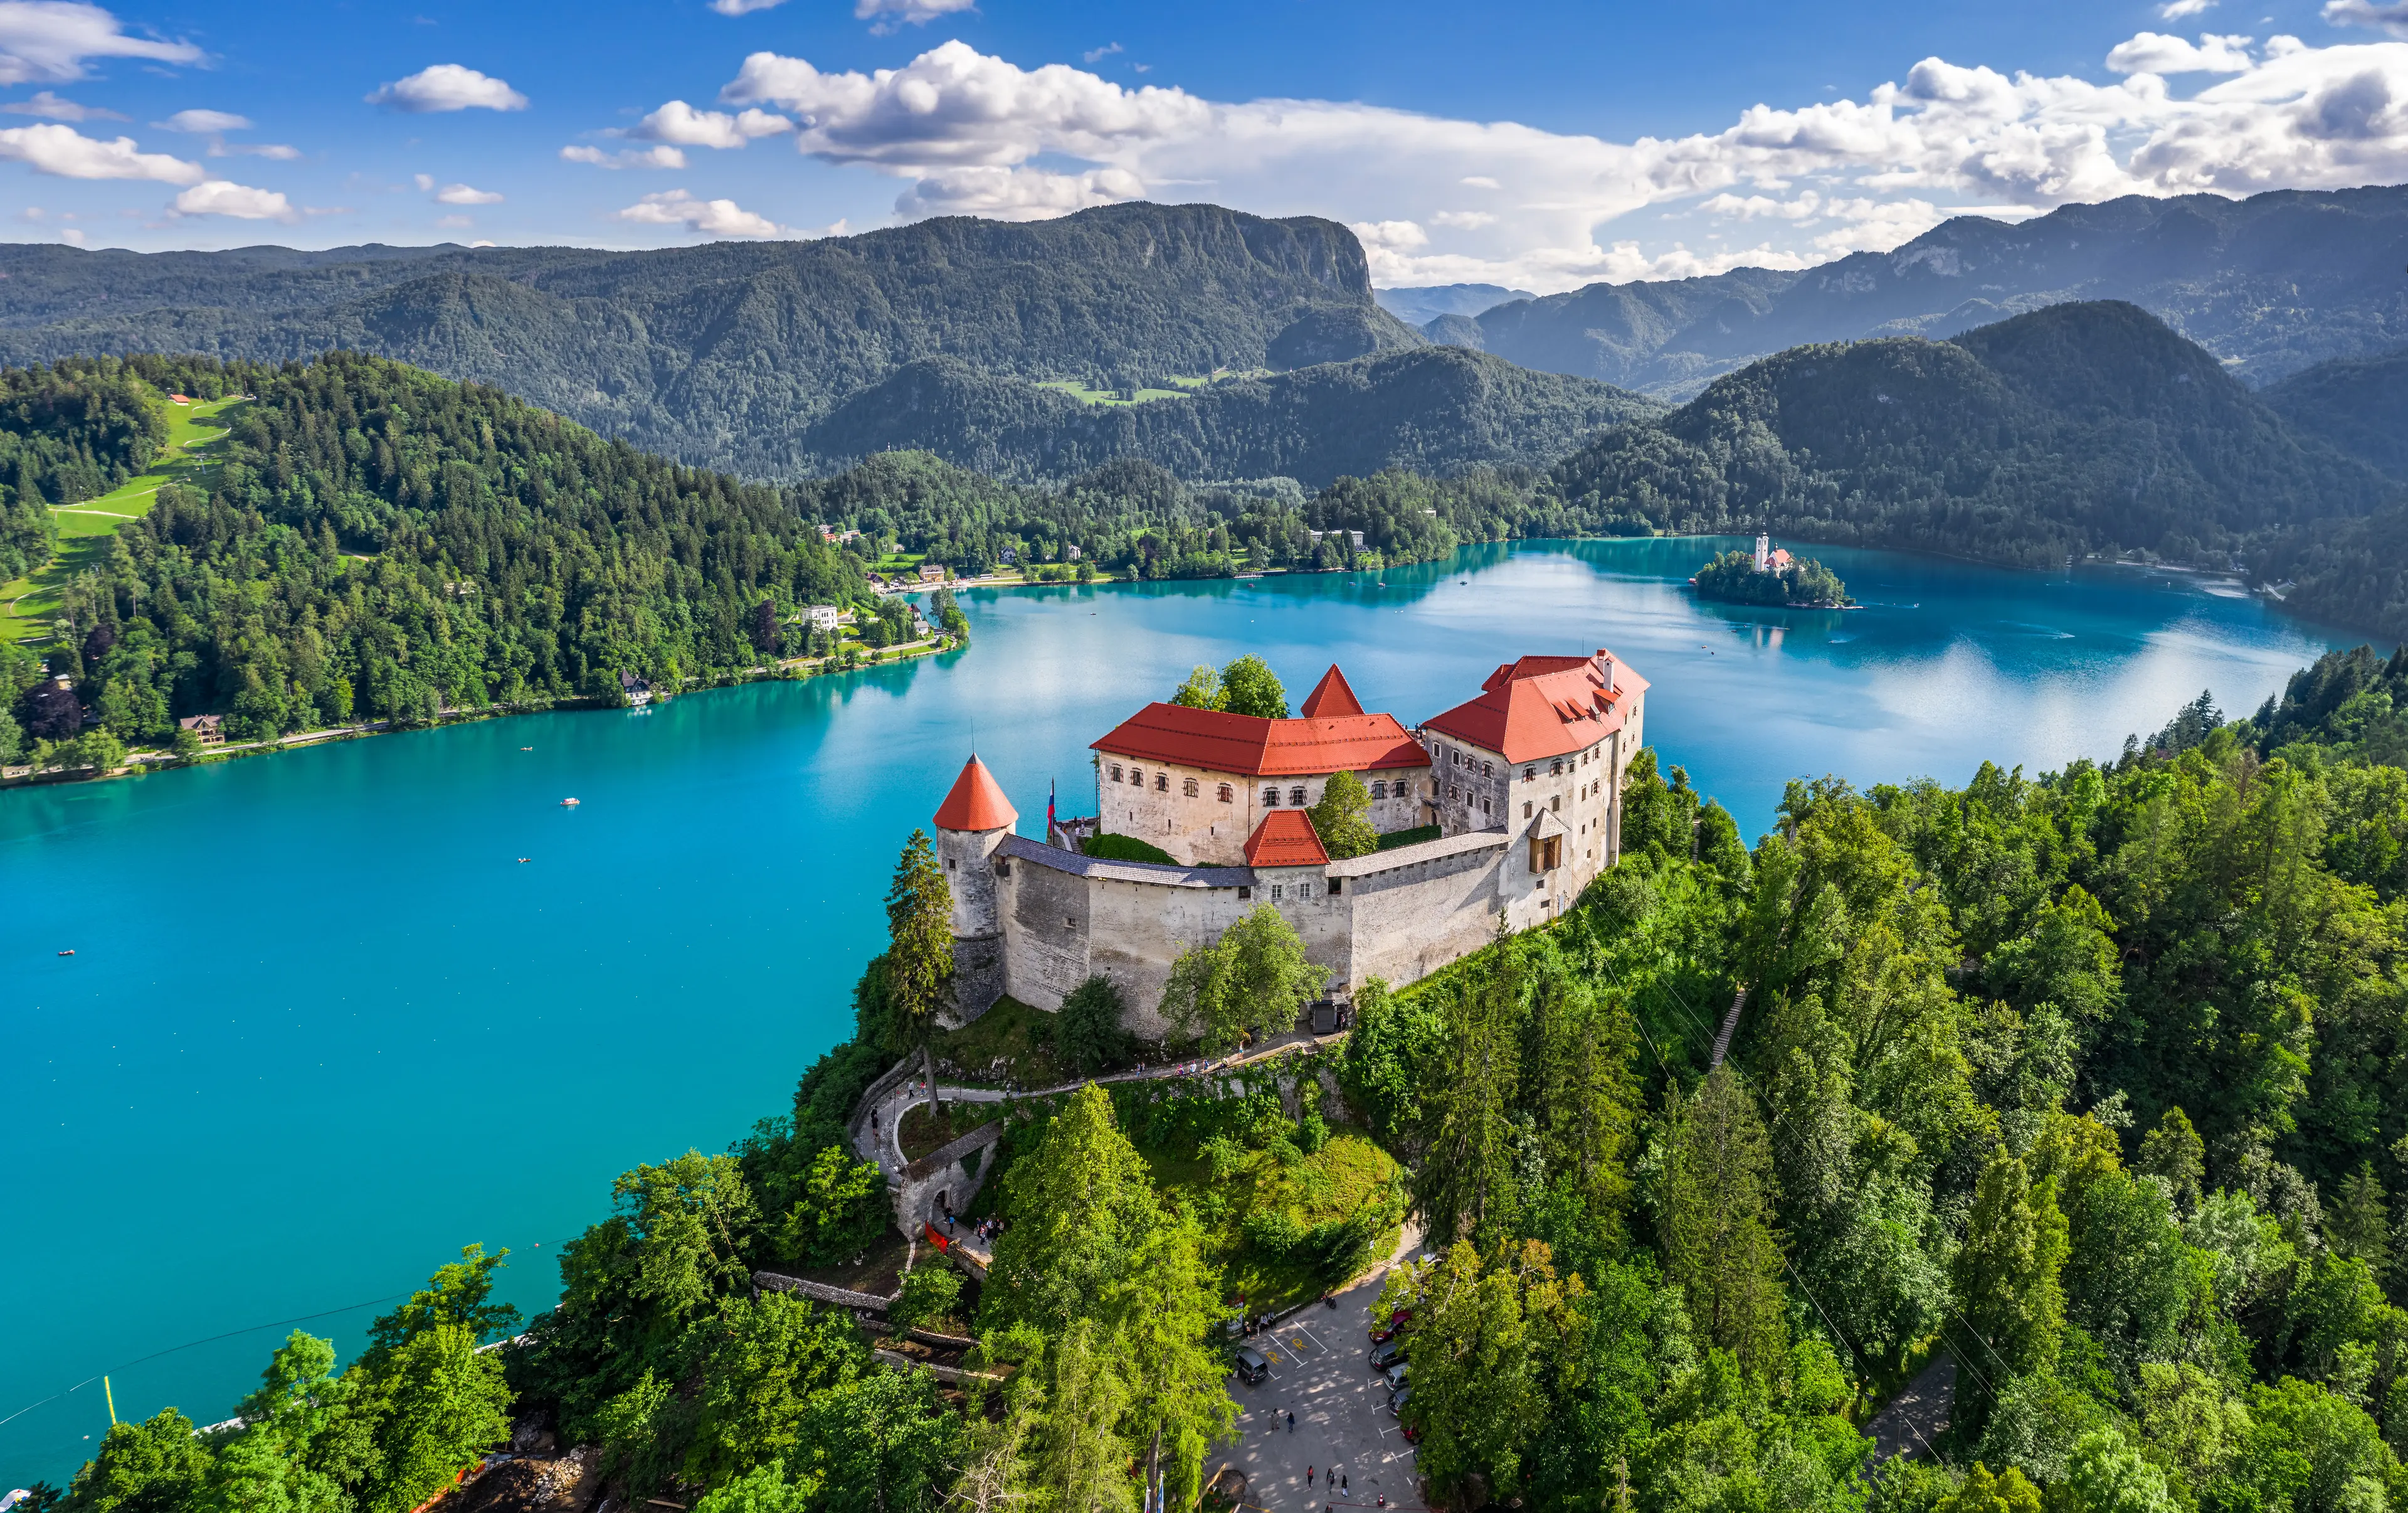 2-Day Local's Guide: Outdoor, Gastronomy & Sightseeing at Lake Bled